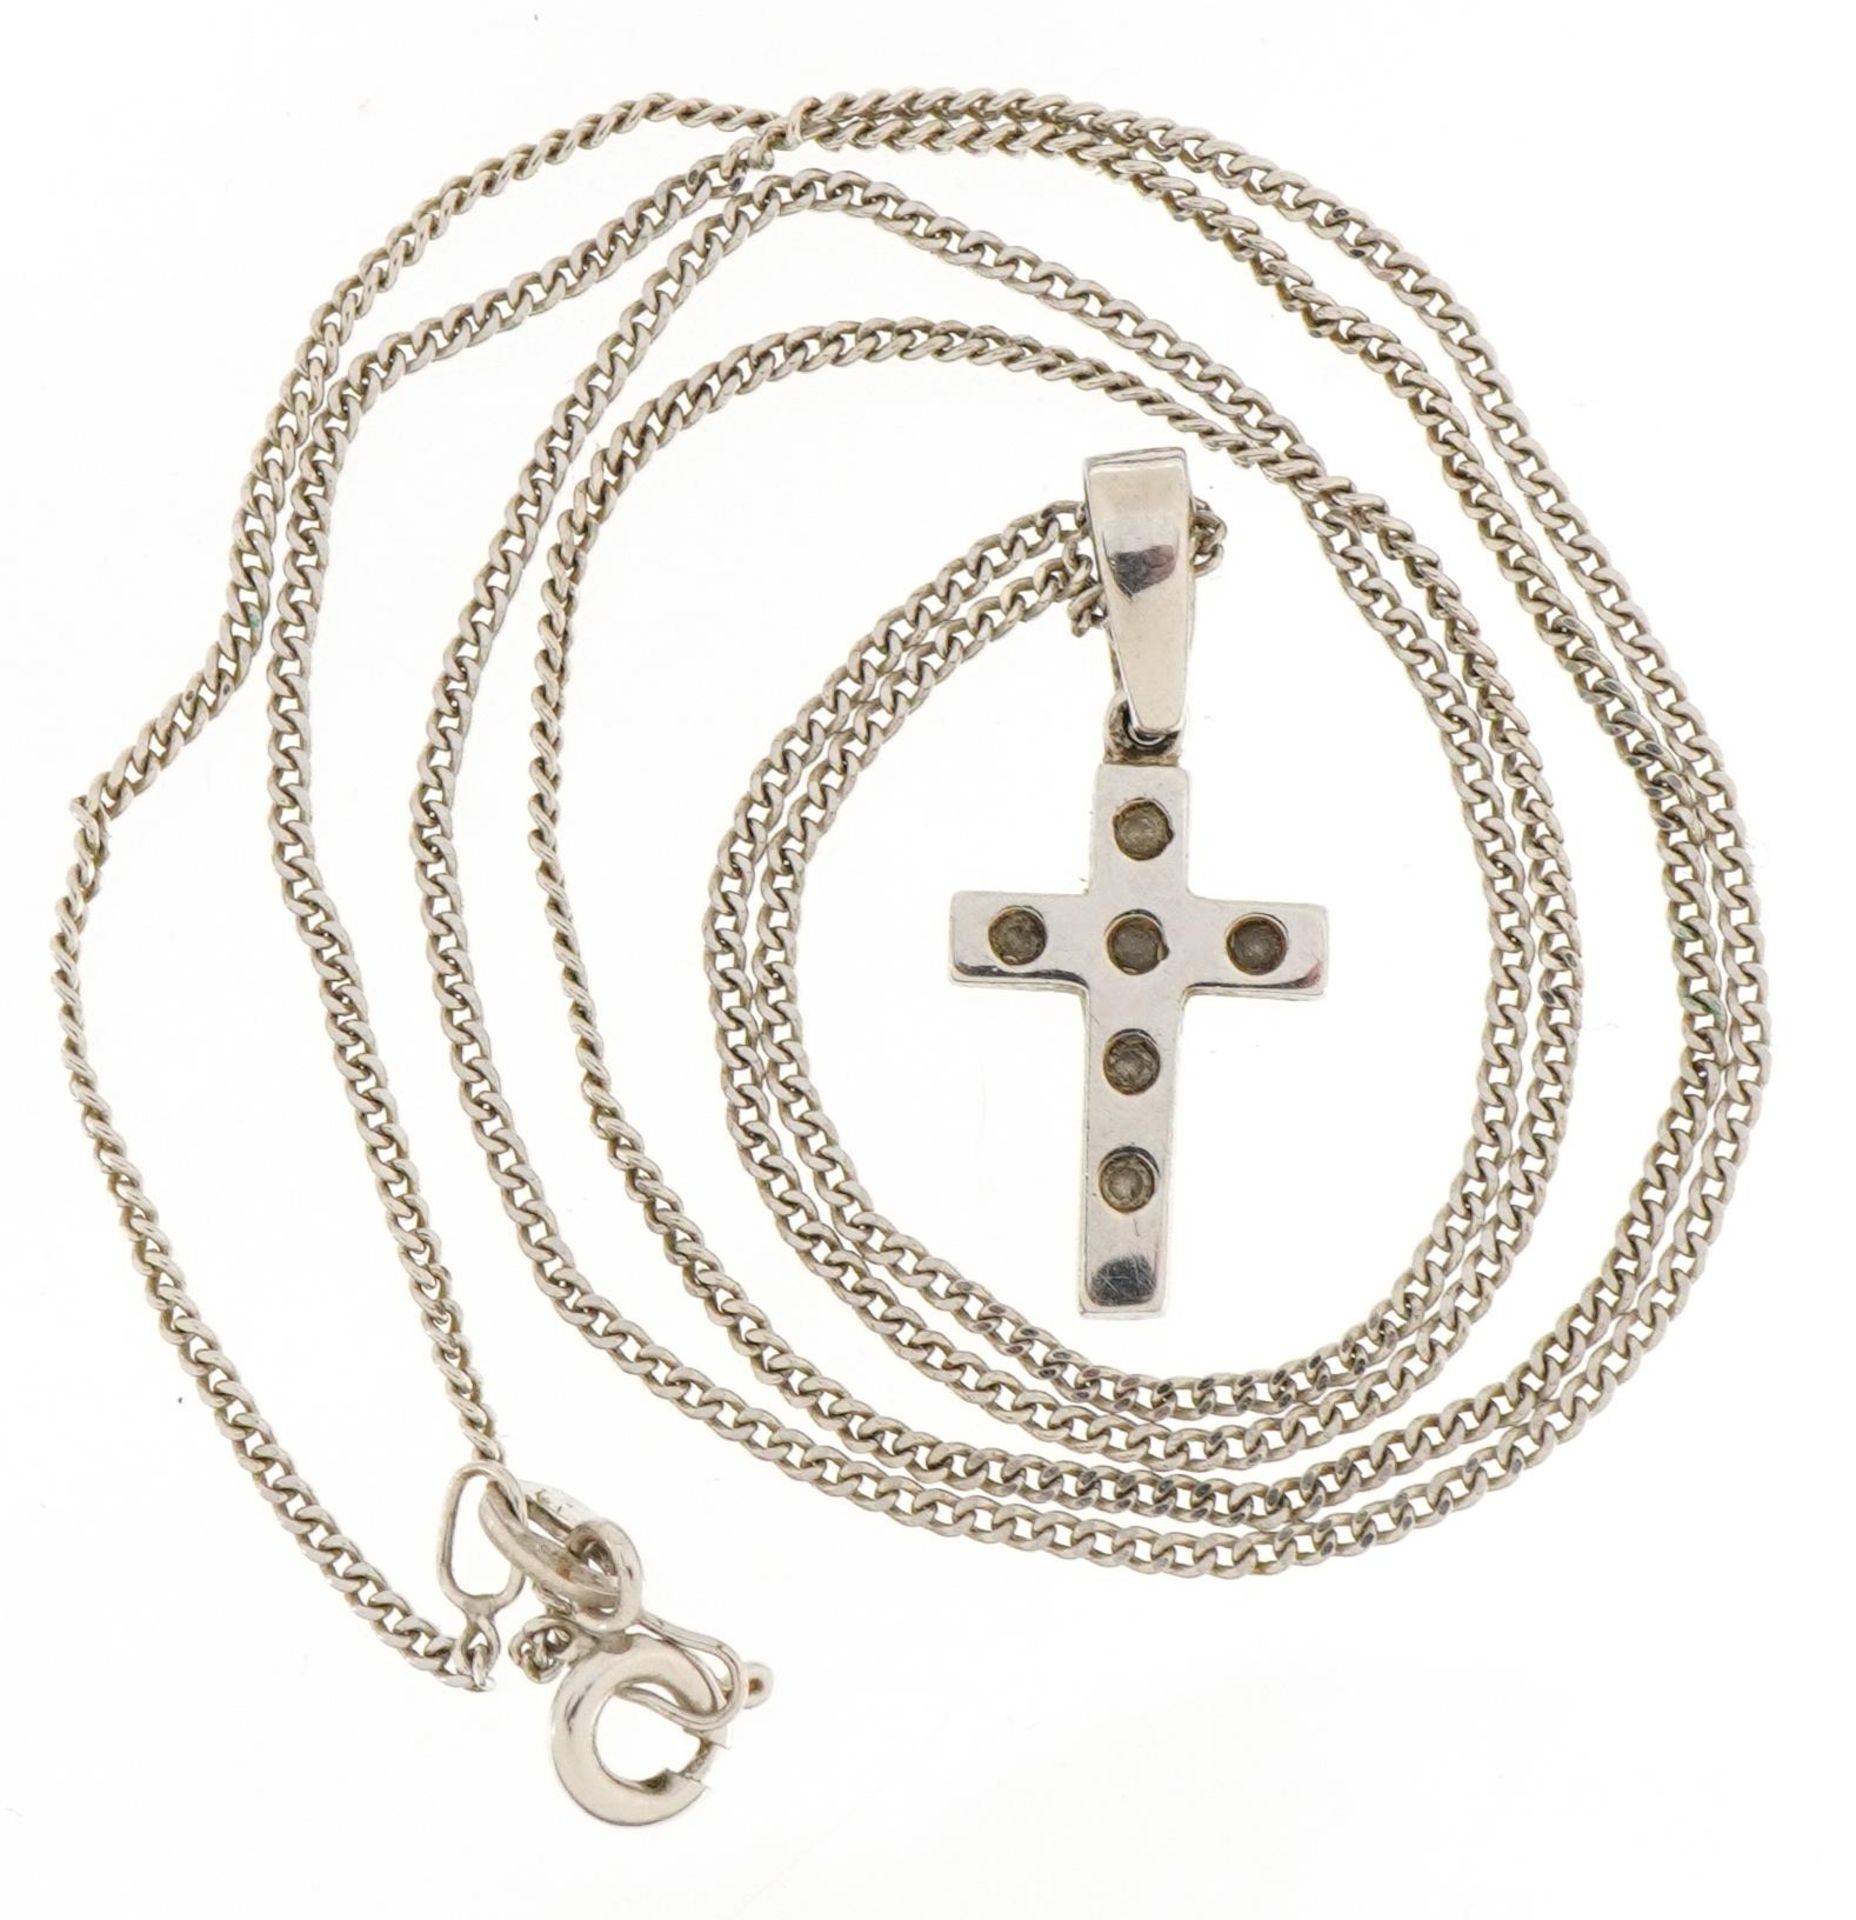 9ct white gold cross pendant set with six diamonds on a 9ct white gold curb link necklace, 2.2cm - Image 2 of 4